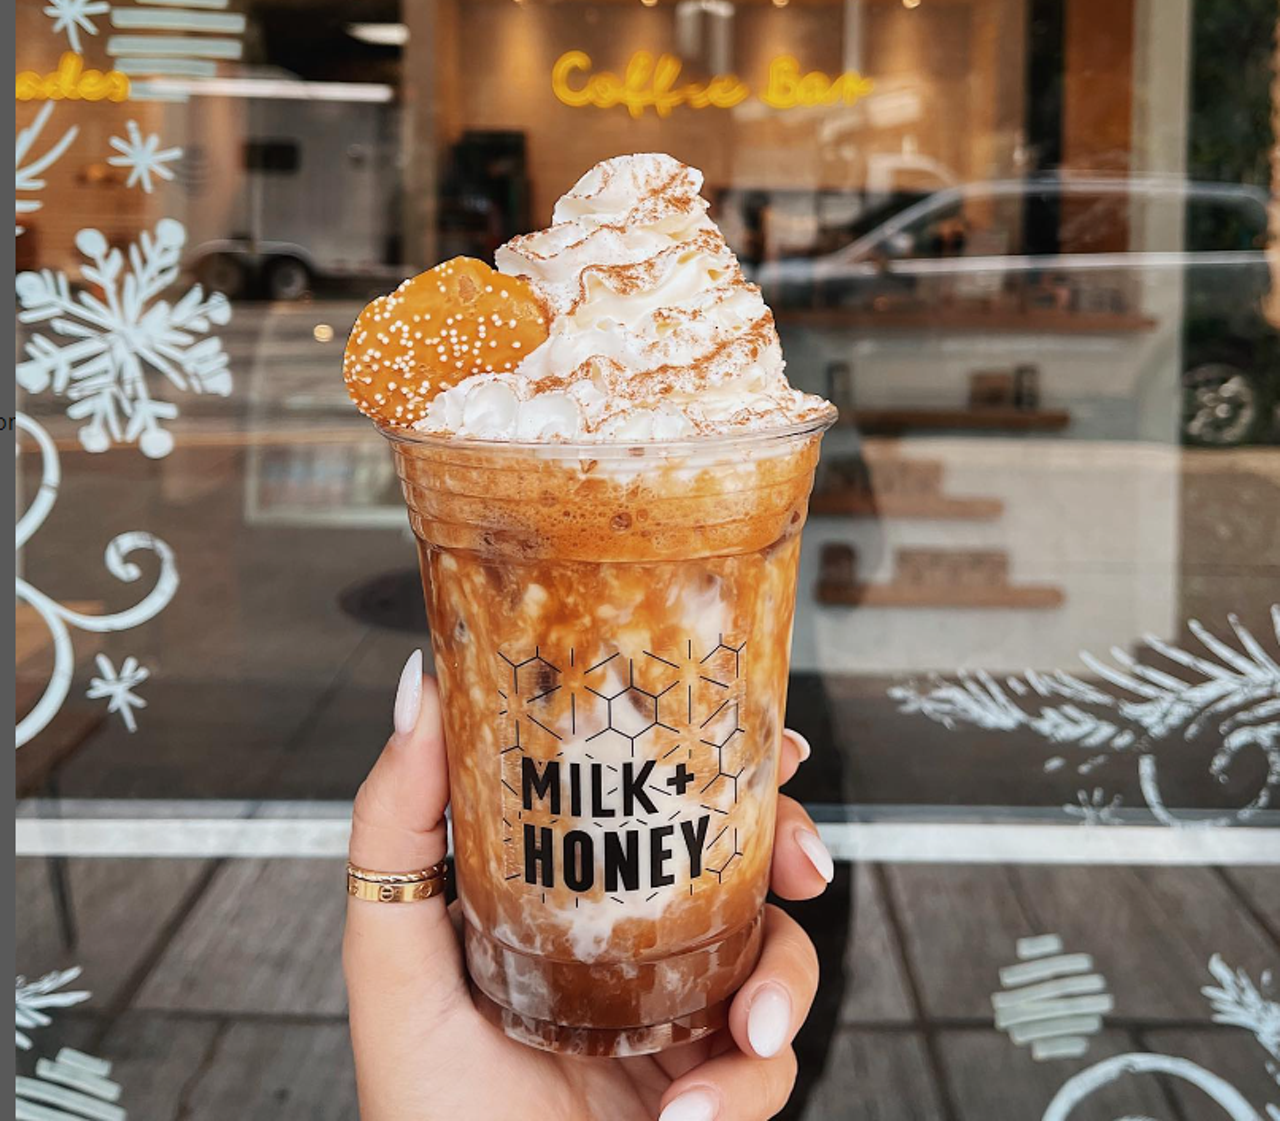 Milk + Honey at Tower City
Tower City
Anisa Rrapaj opened Milk + Honey downtown in 2021. She also operates the Hive by Milk + Honey in the Limelight Building in Ohio City. This month, she opened a new Milk + Honey cafe at Tower City, in the space formerly occupied by Starbucks. On the menu are coffee and espresso drinks, chai drinks, specialty coffee drinks and fruit smoothies. To eat, there are breakfast bagel sandwiches, avocado toast and vegan chia pudding. At lunch, there are sandwiches starring chicken salad, turkey and even steak.